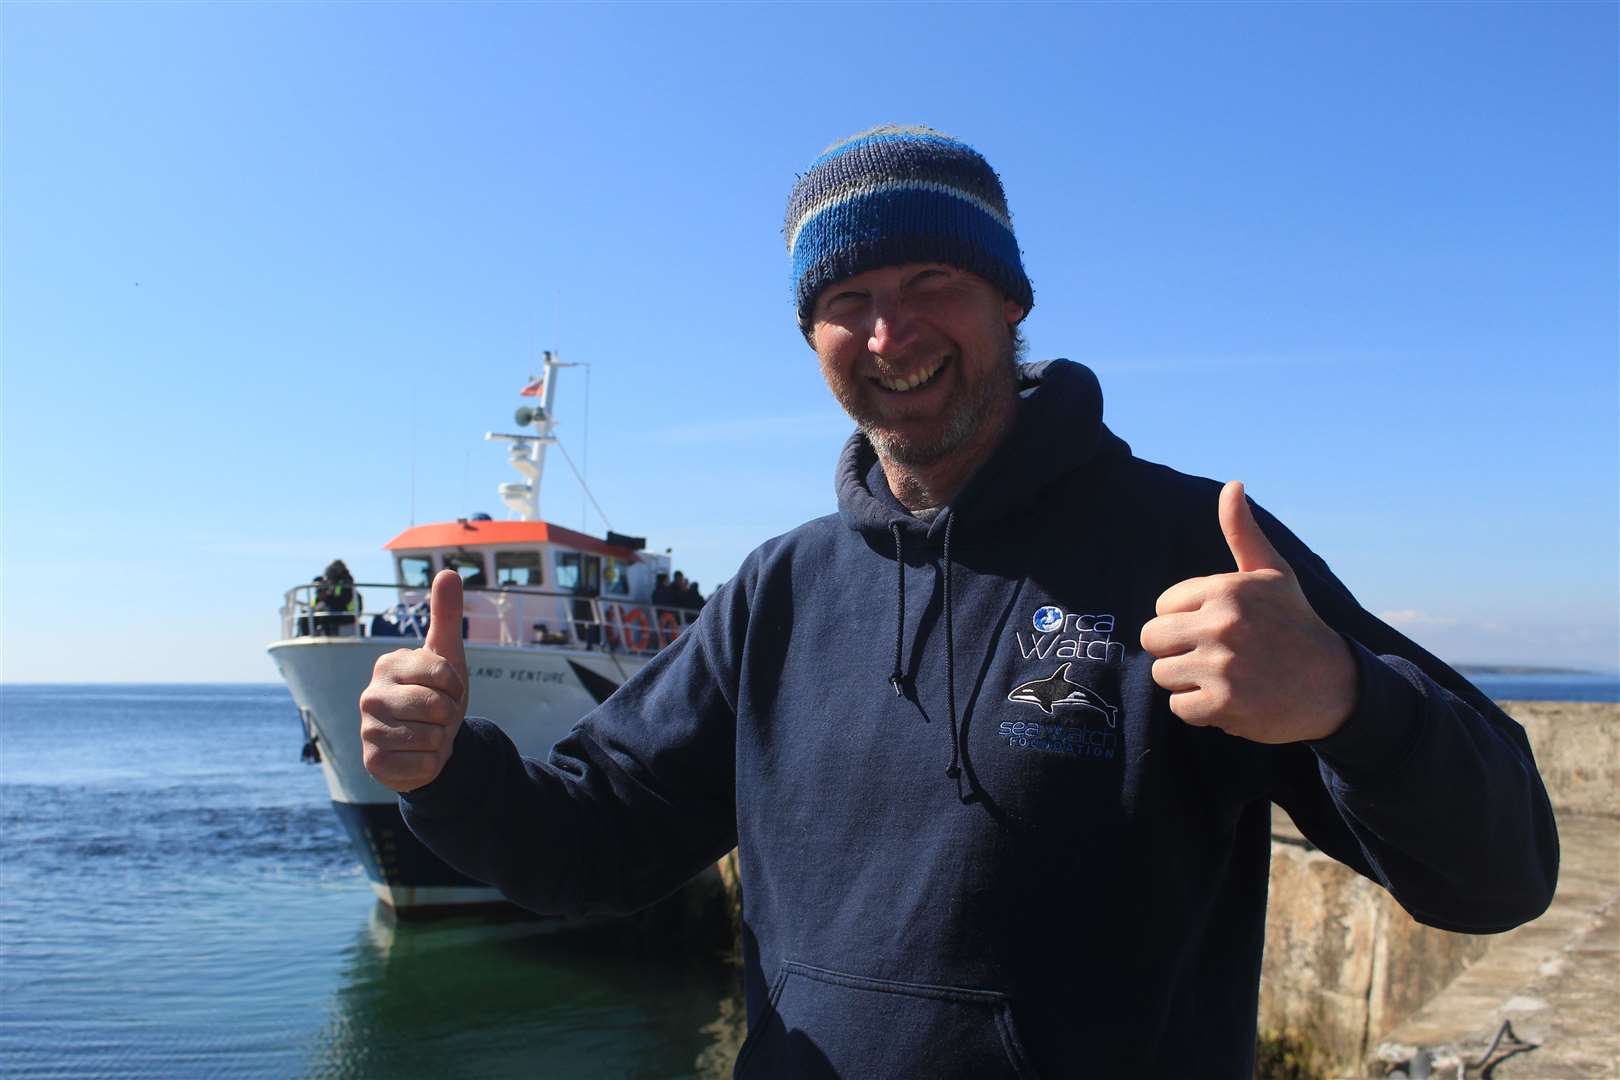 Steve Truluck, a whale-watching guide and naturalist who helps at Orca Watch each year. Picture: Alan Hendry